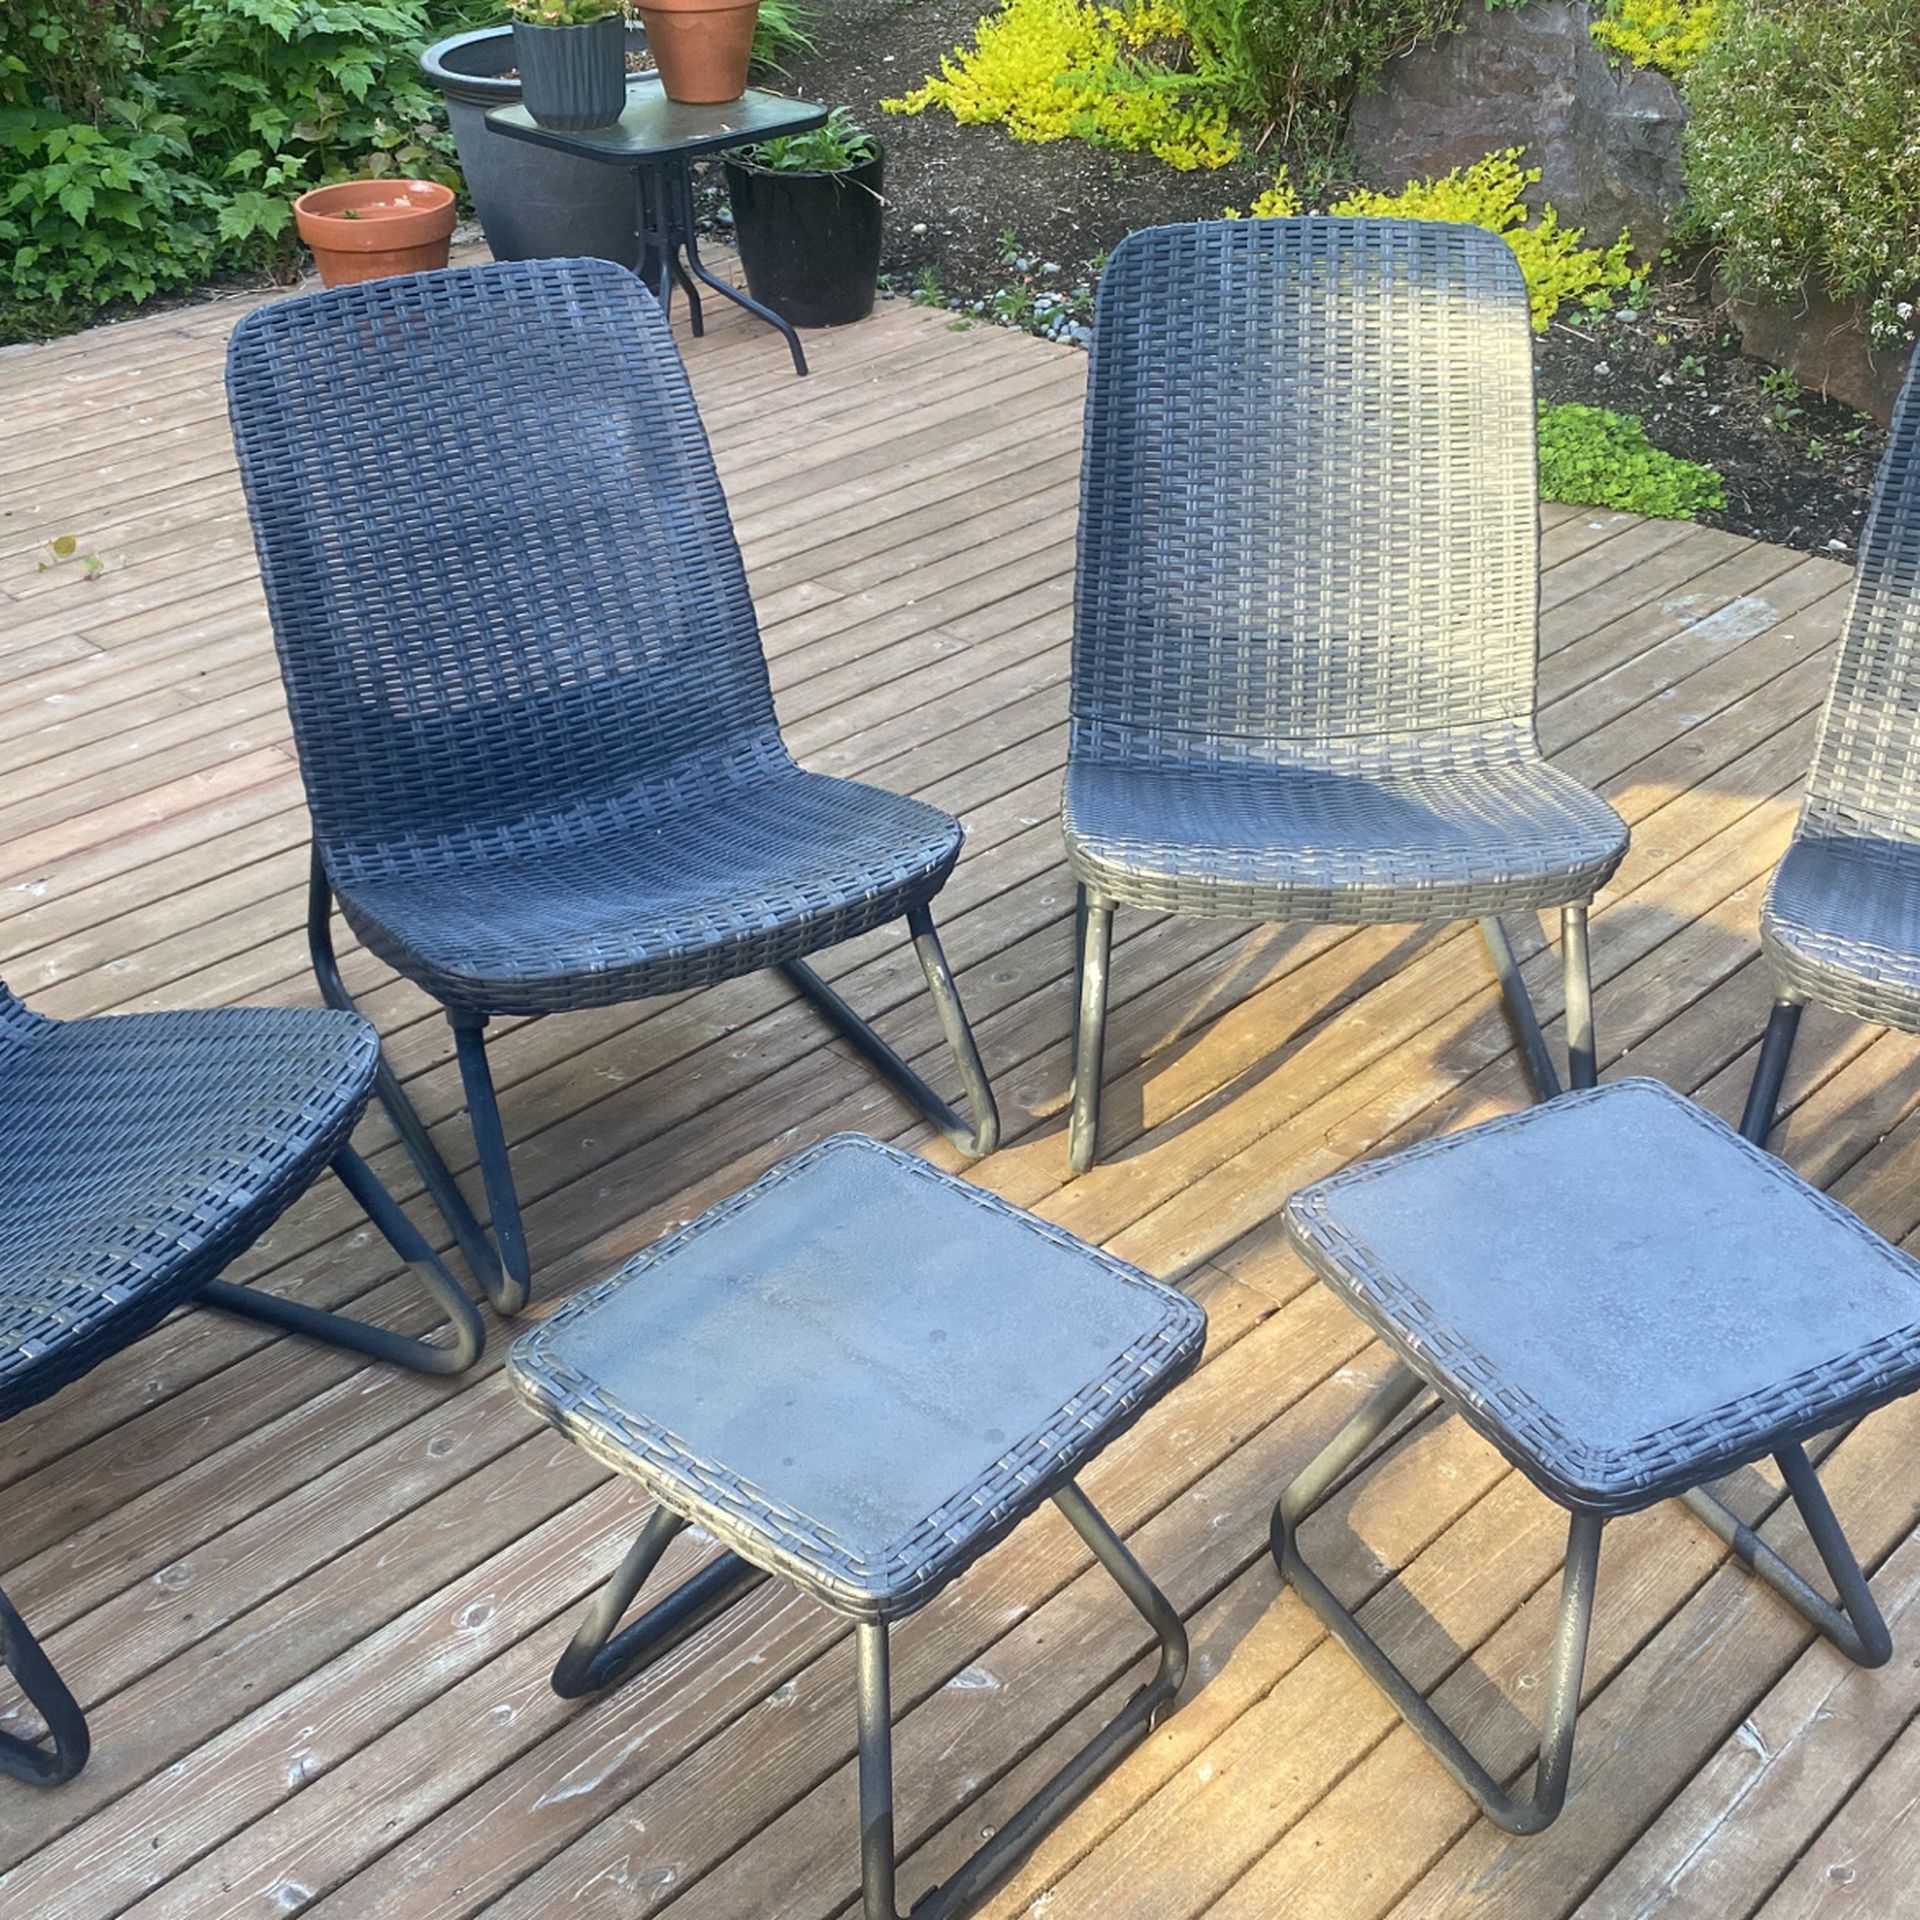 Deck chairs and Tables